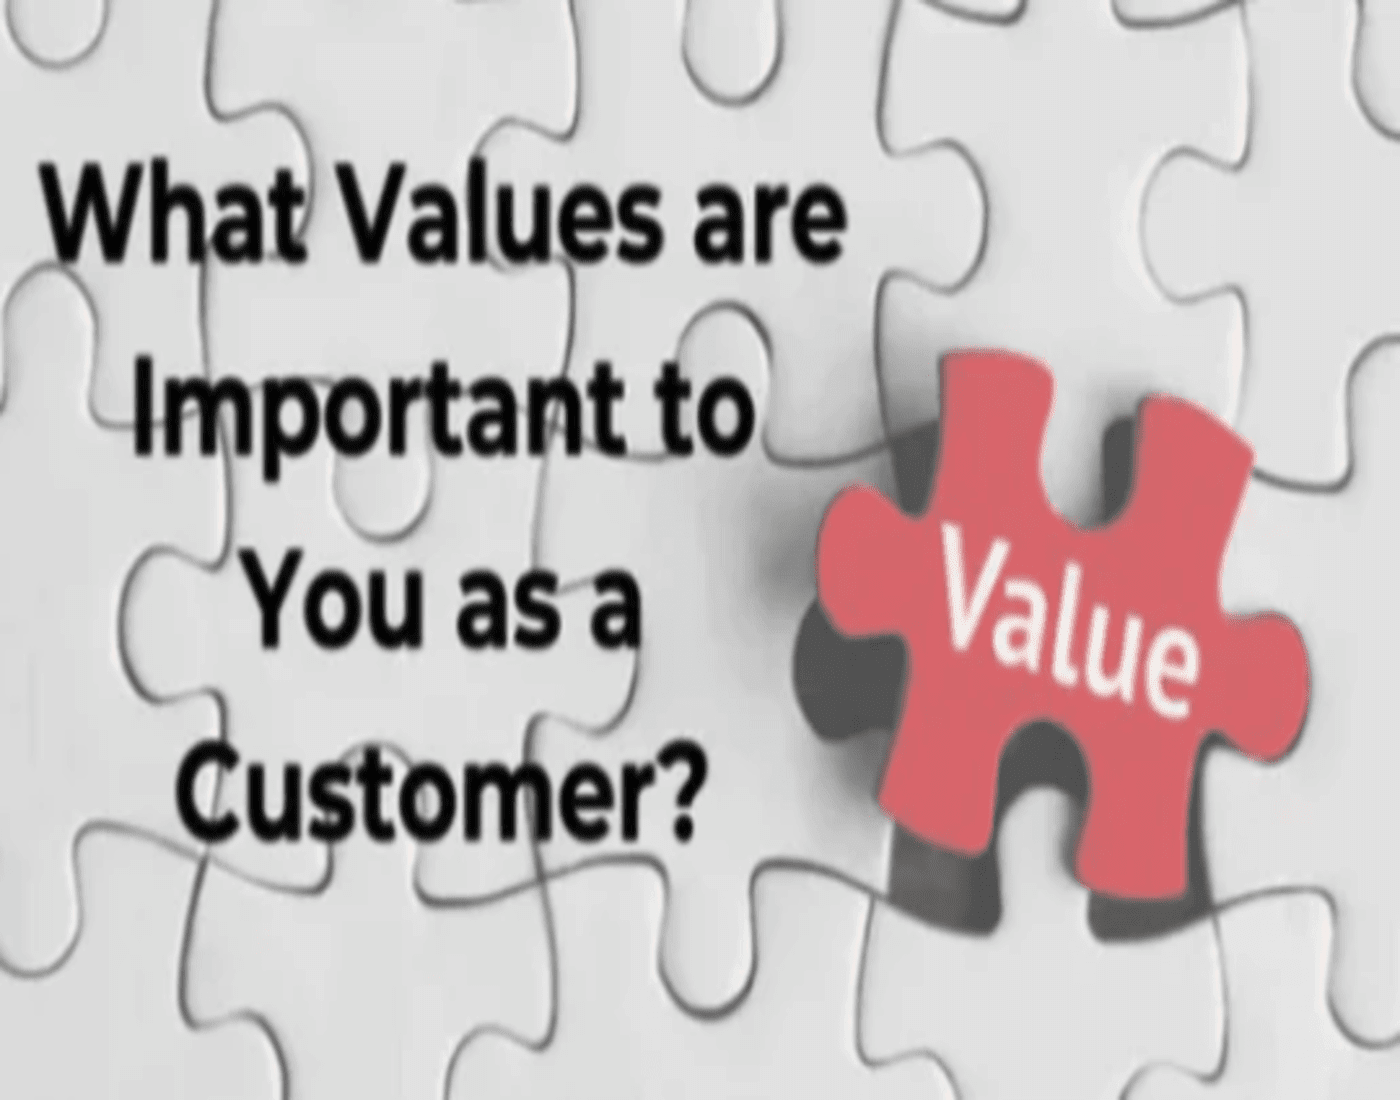 What Values are Important to You as a Customer?